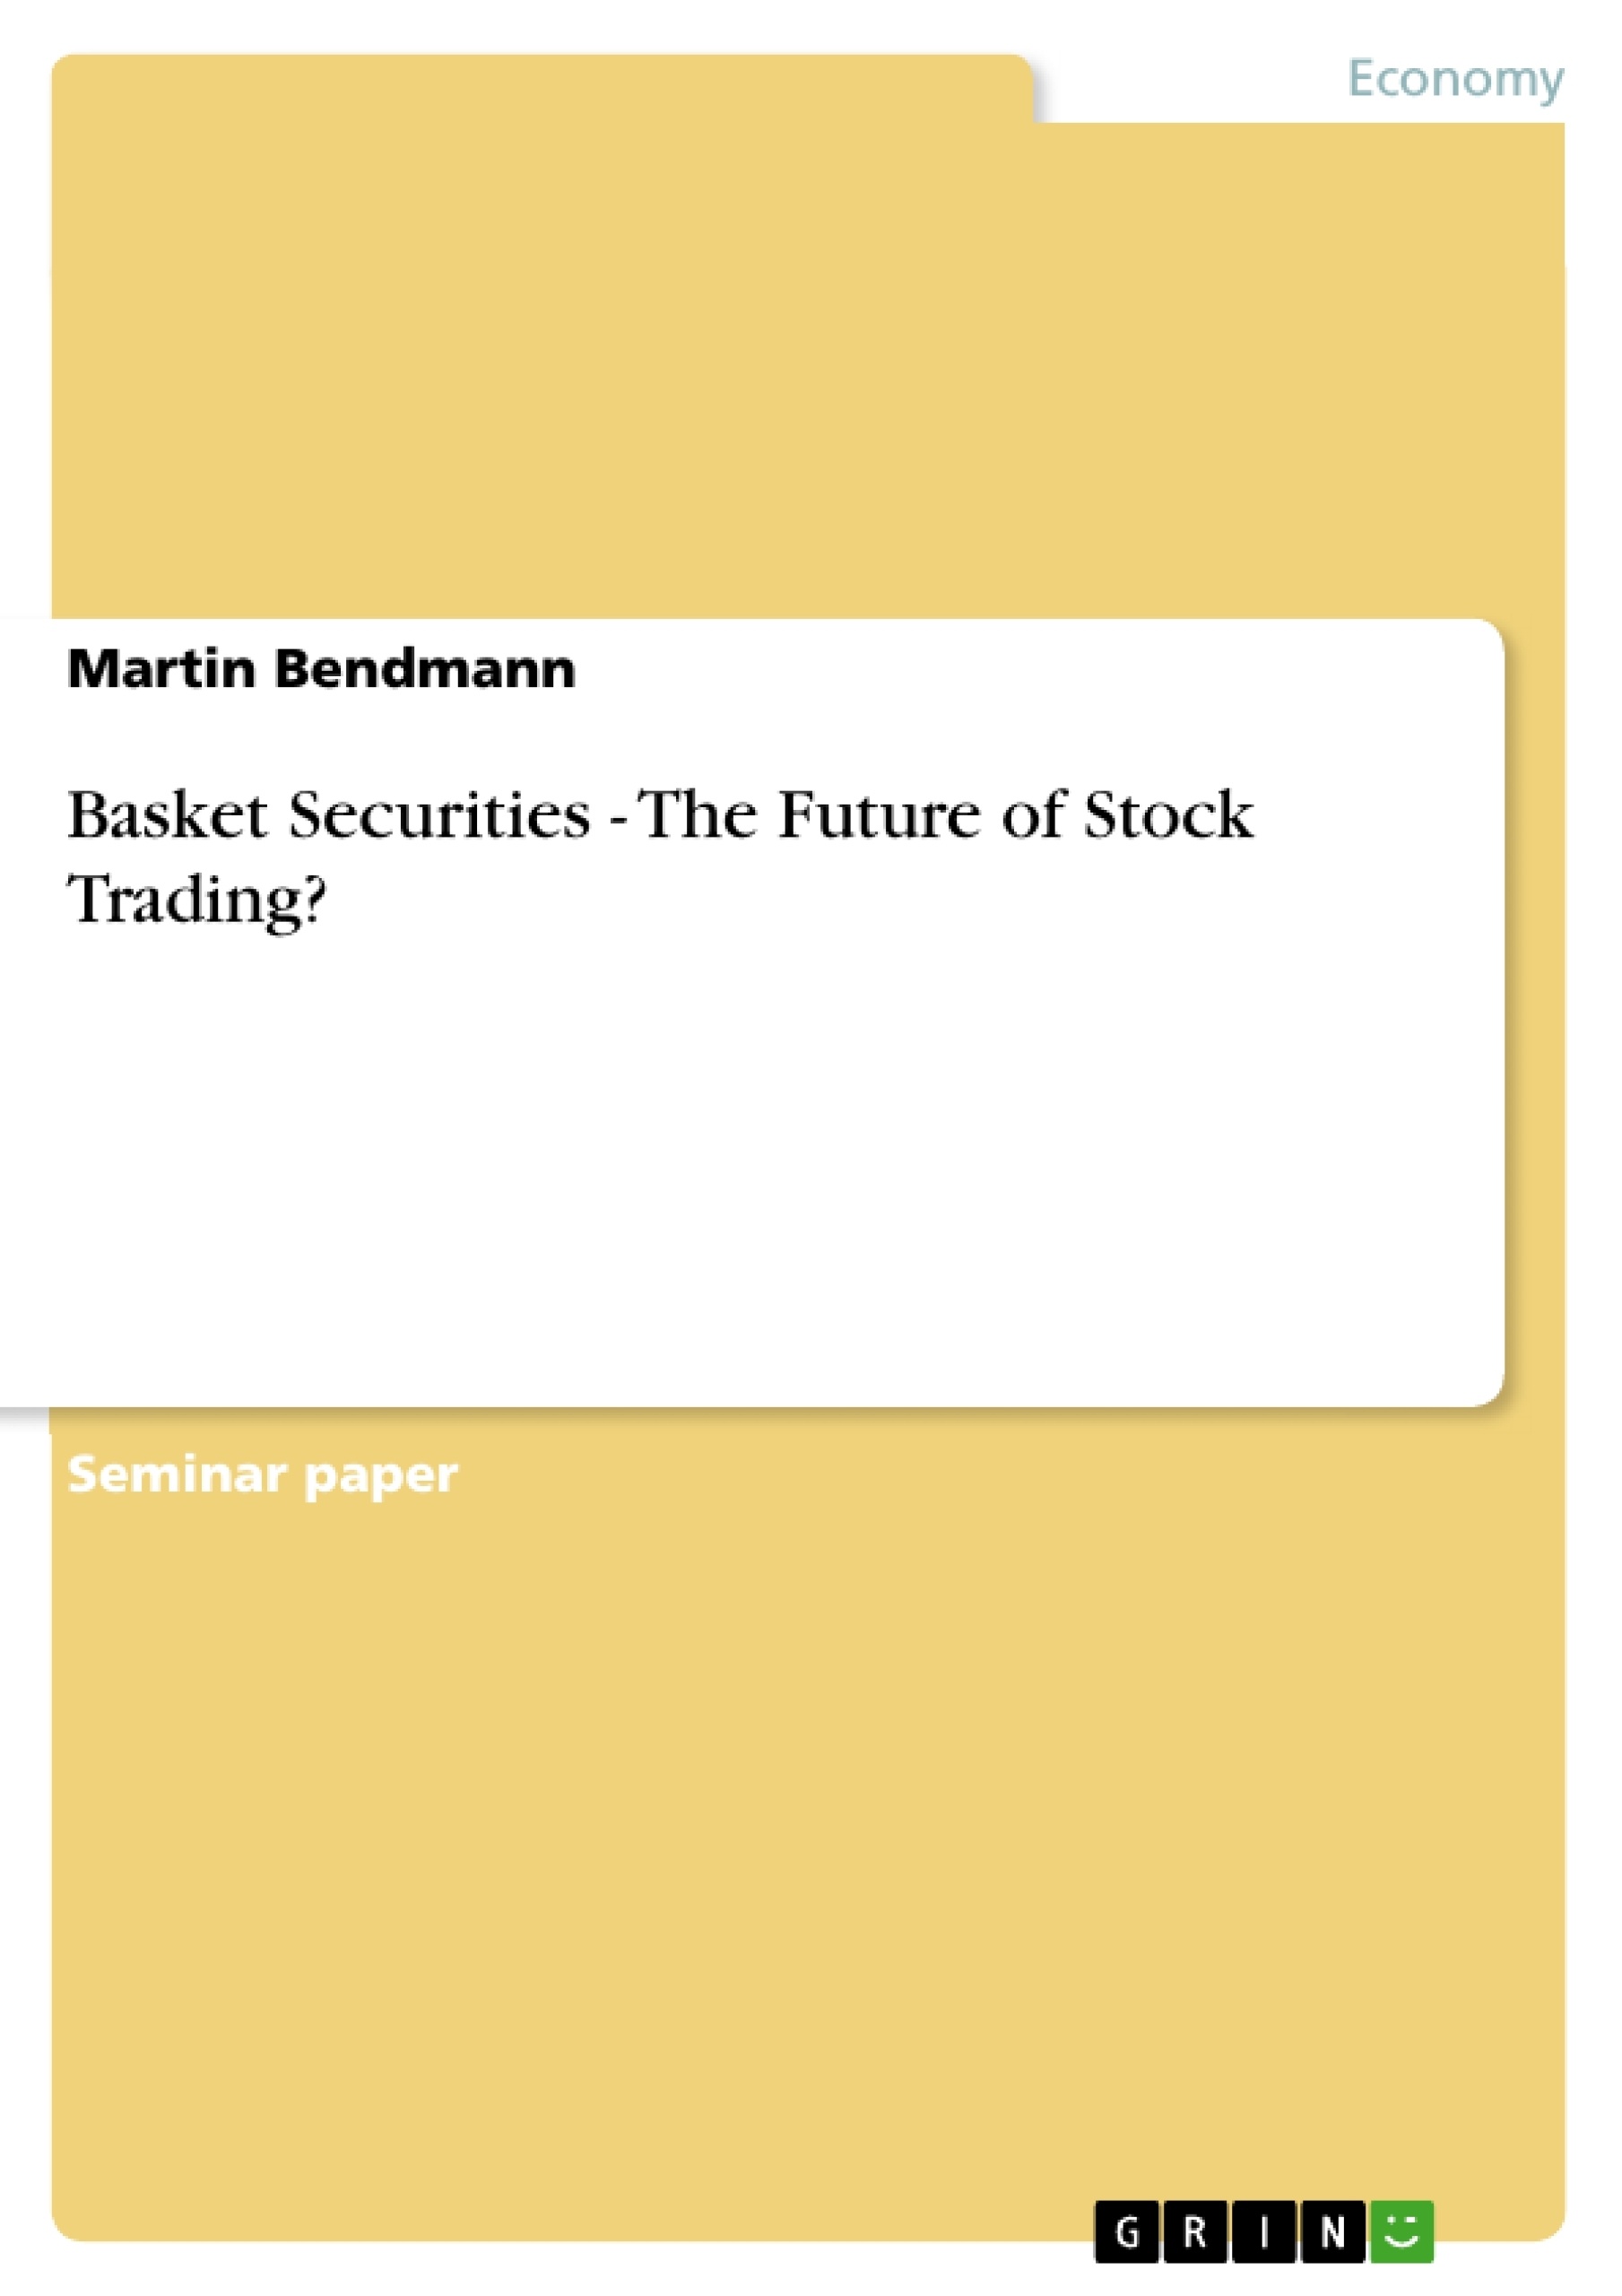 Título: Basket Securities - The Future of Stock Trading?